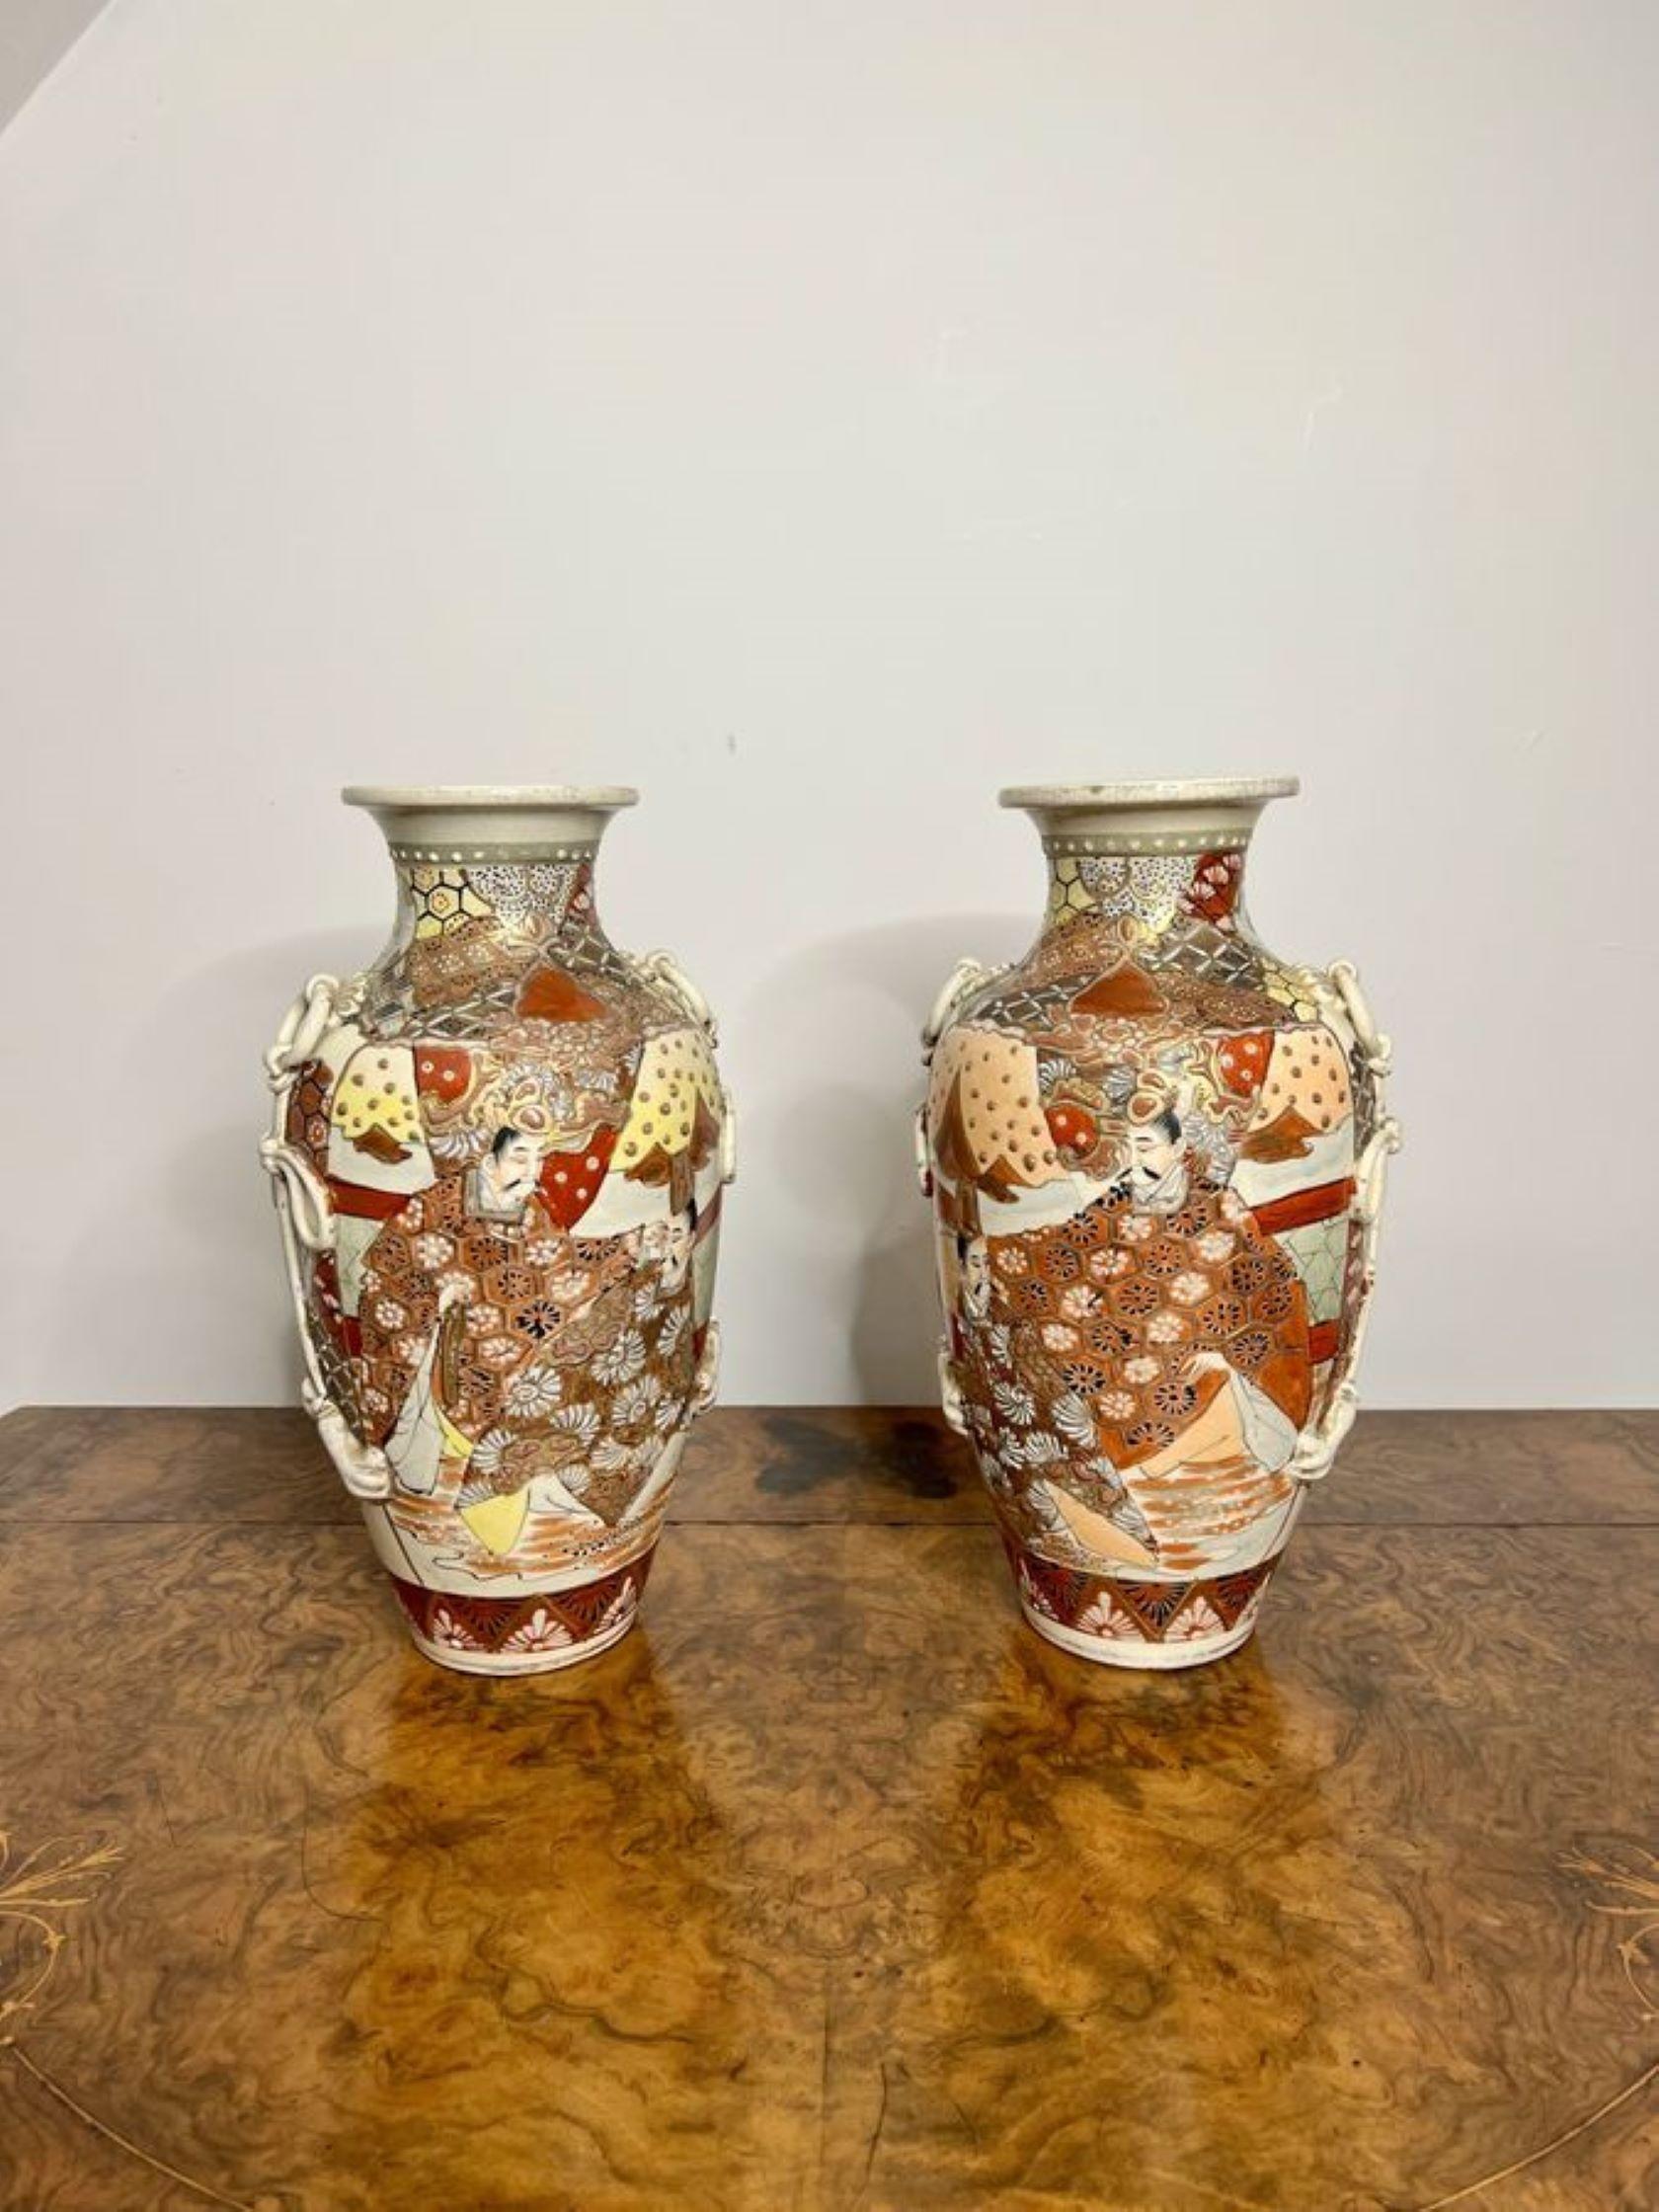 Quality pair of large antique Satsuma vases having a quality pair of large satsuma vases hand painted with wonderful decorated panels in red, yellow, black, blue and gold colours raised on circular bases.

D. 1910